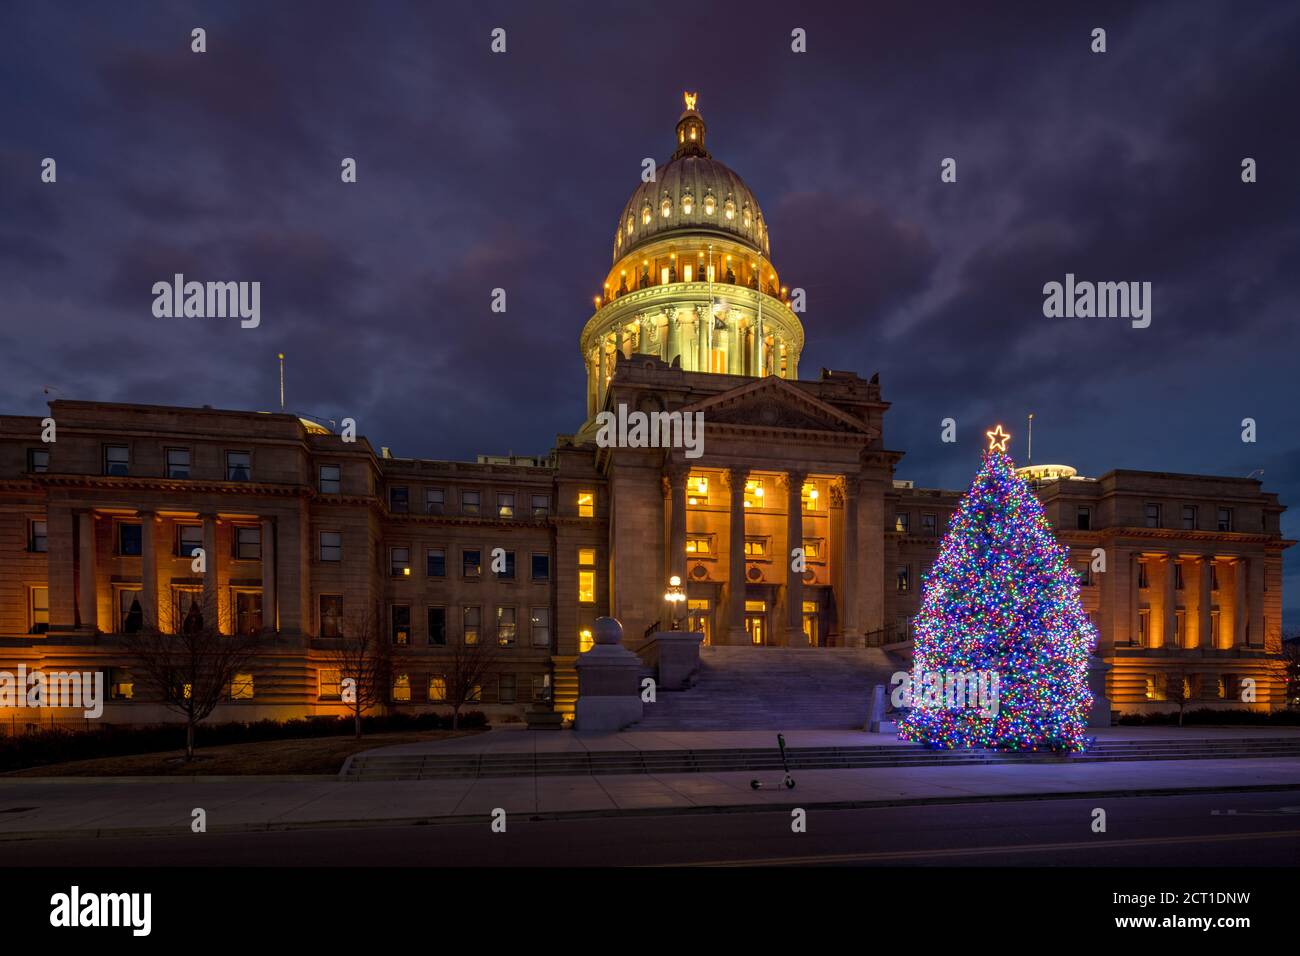 Night at the Idaho capital with a colorful Christmas tree Stock Photo